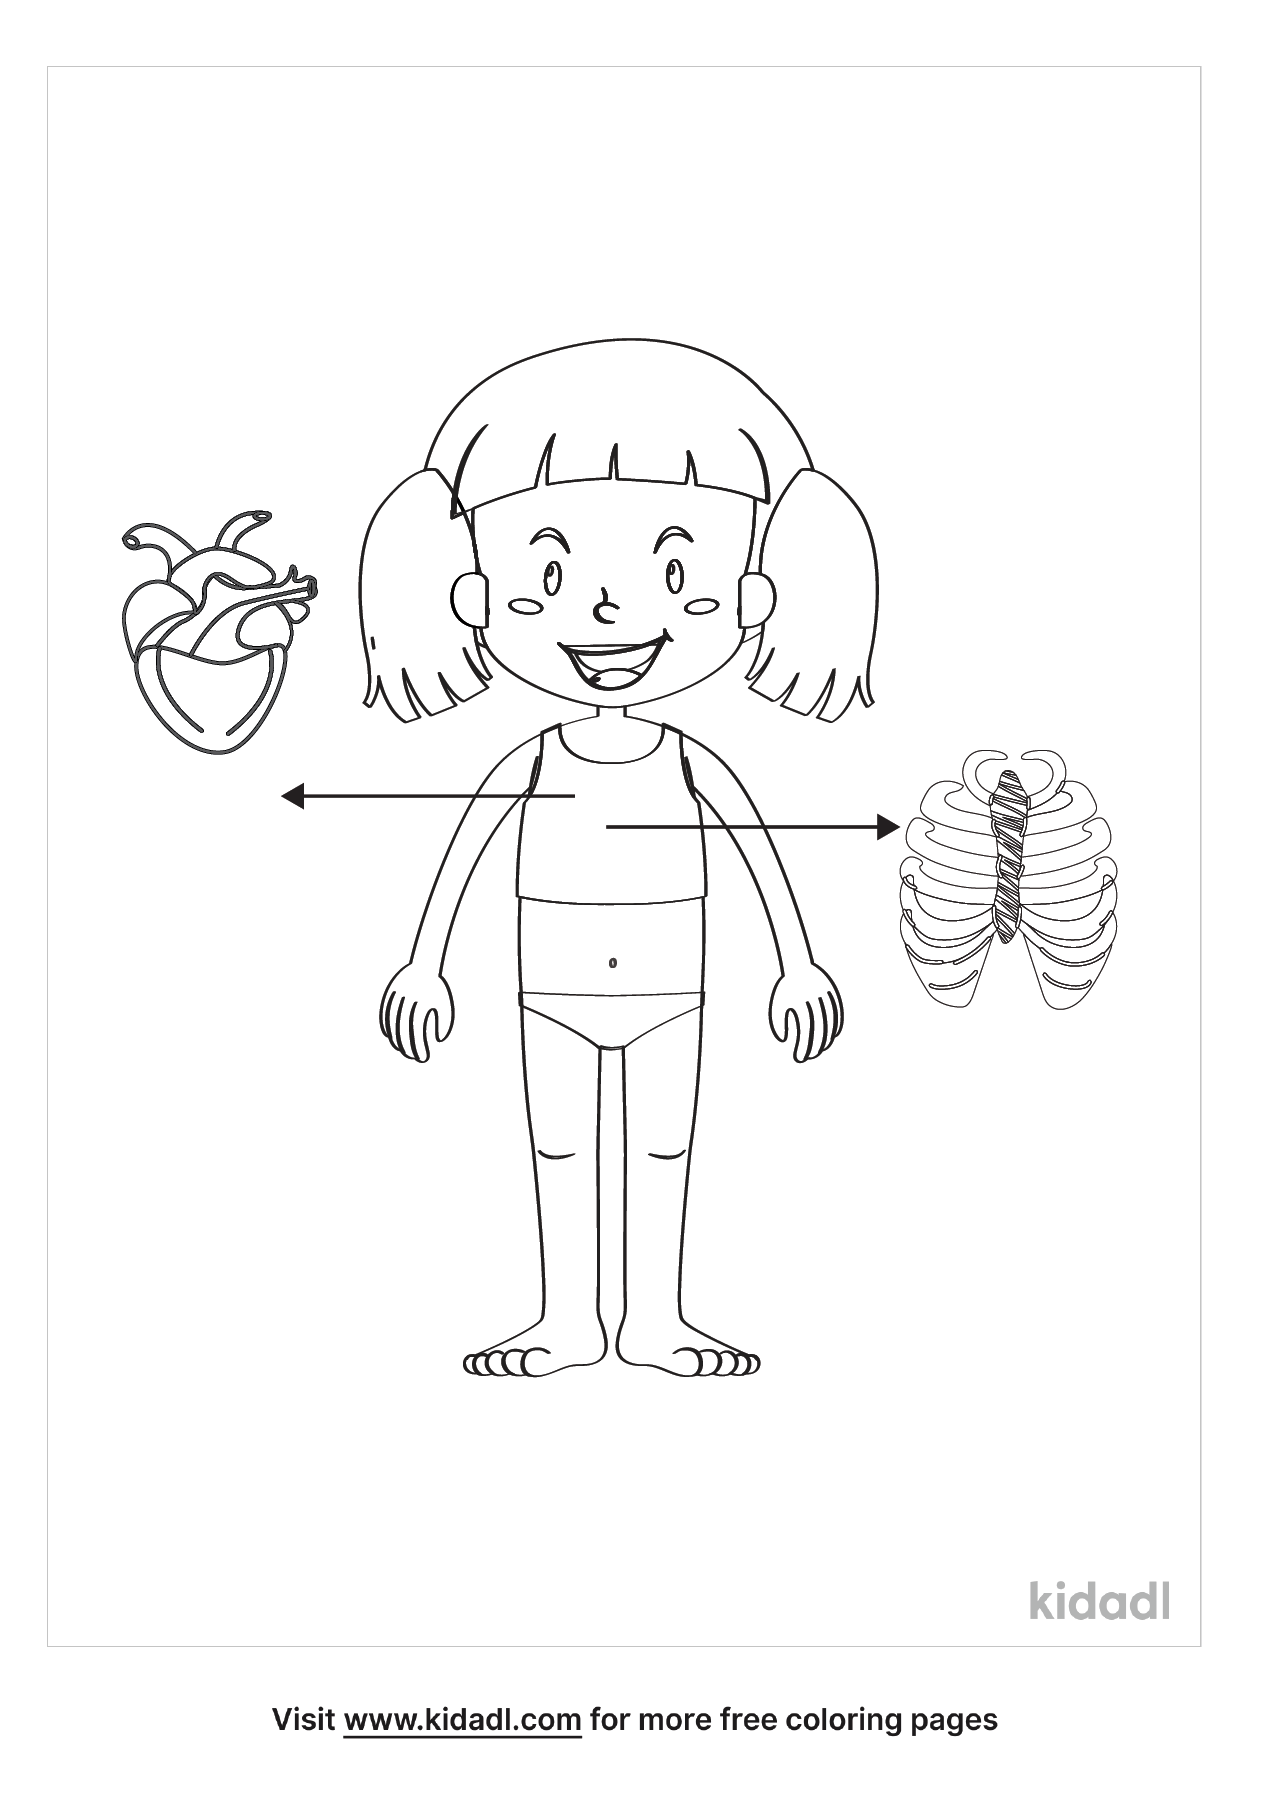 Human Anatomy For Kids Coloring Pages | Free Human-body Coloring Pages |  Kidadl